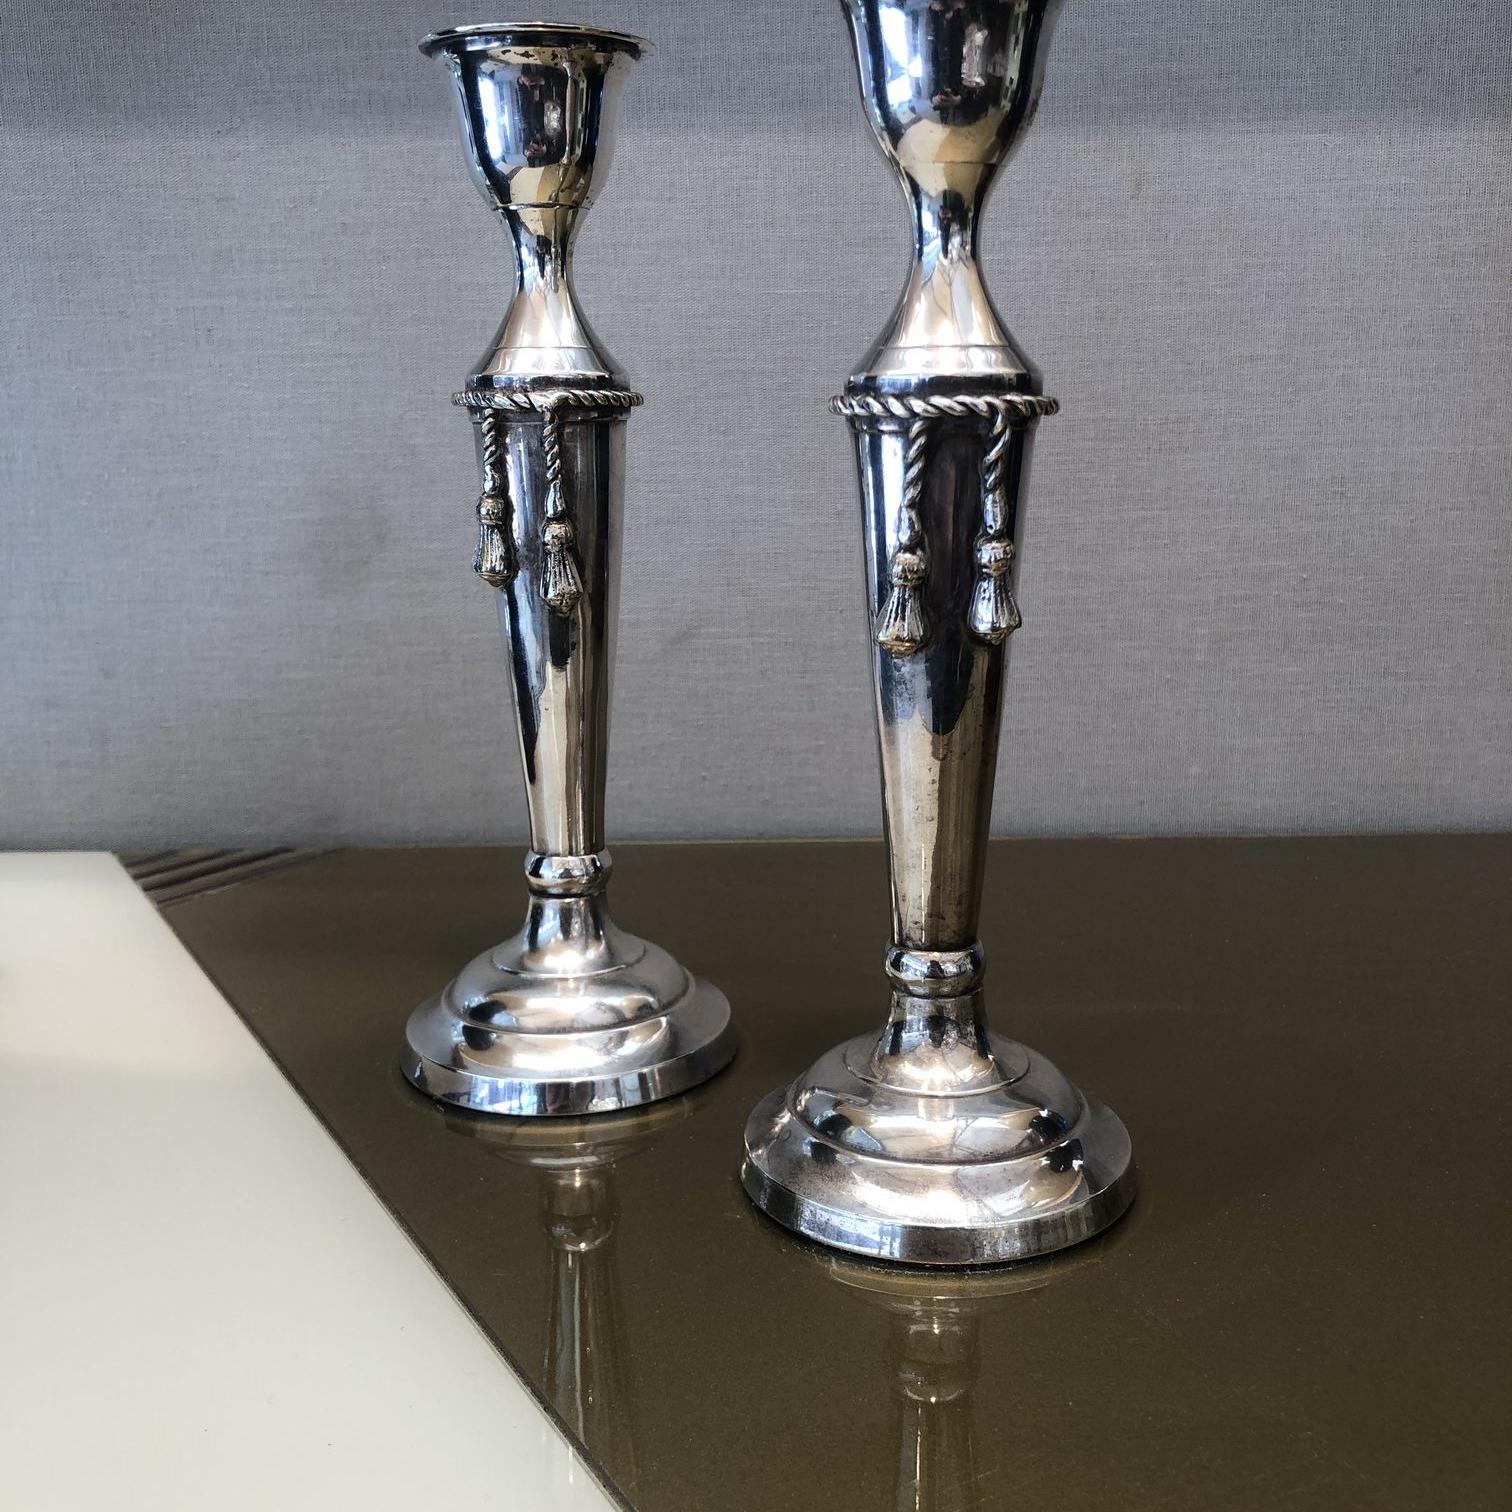 Pair of Candlesticks in the Mid-Century Style, 20th Century